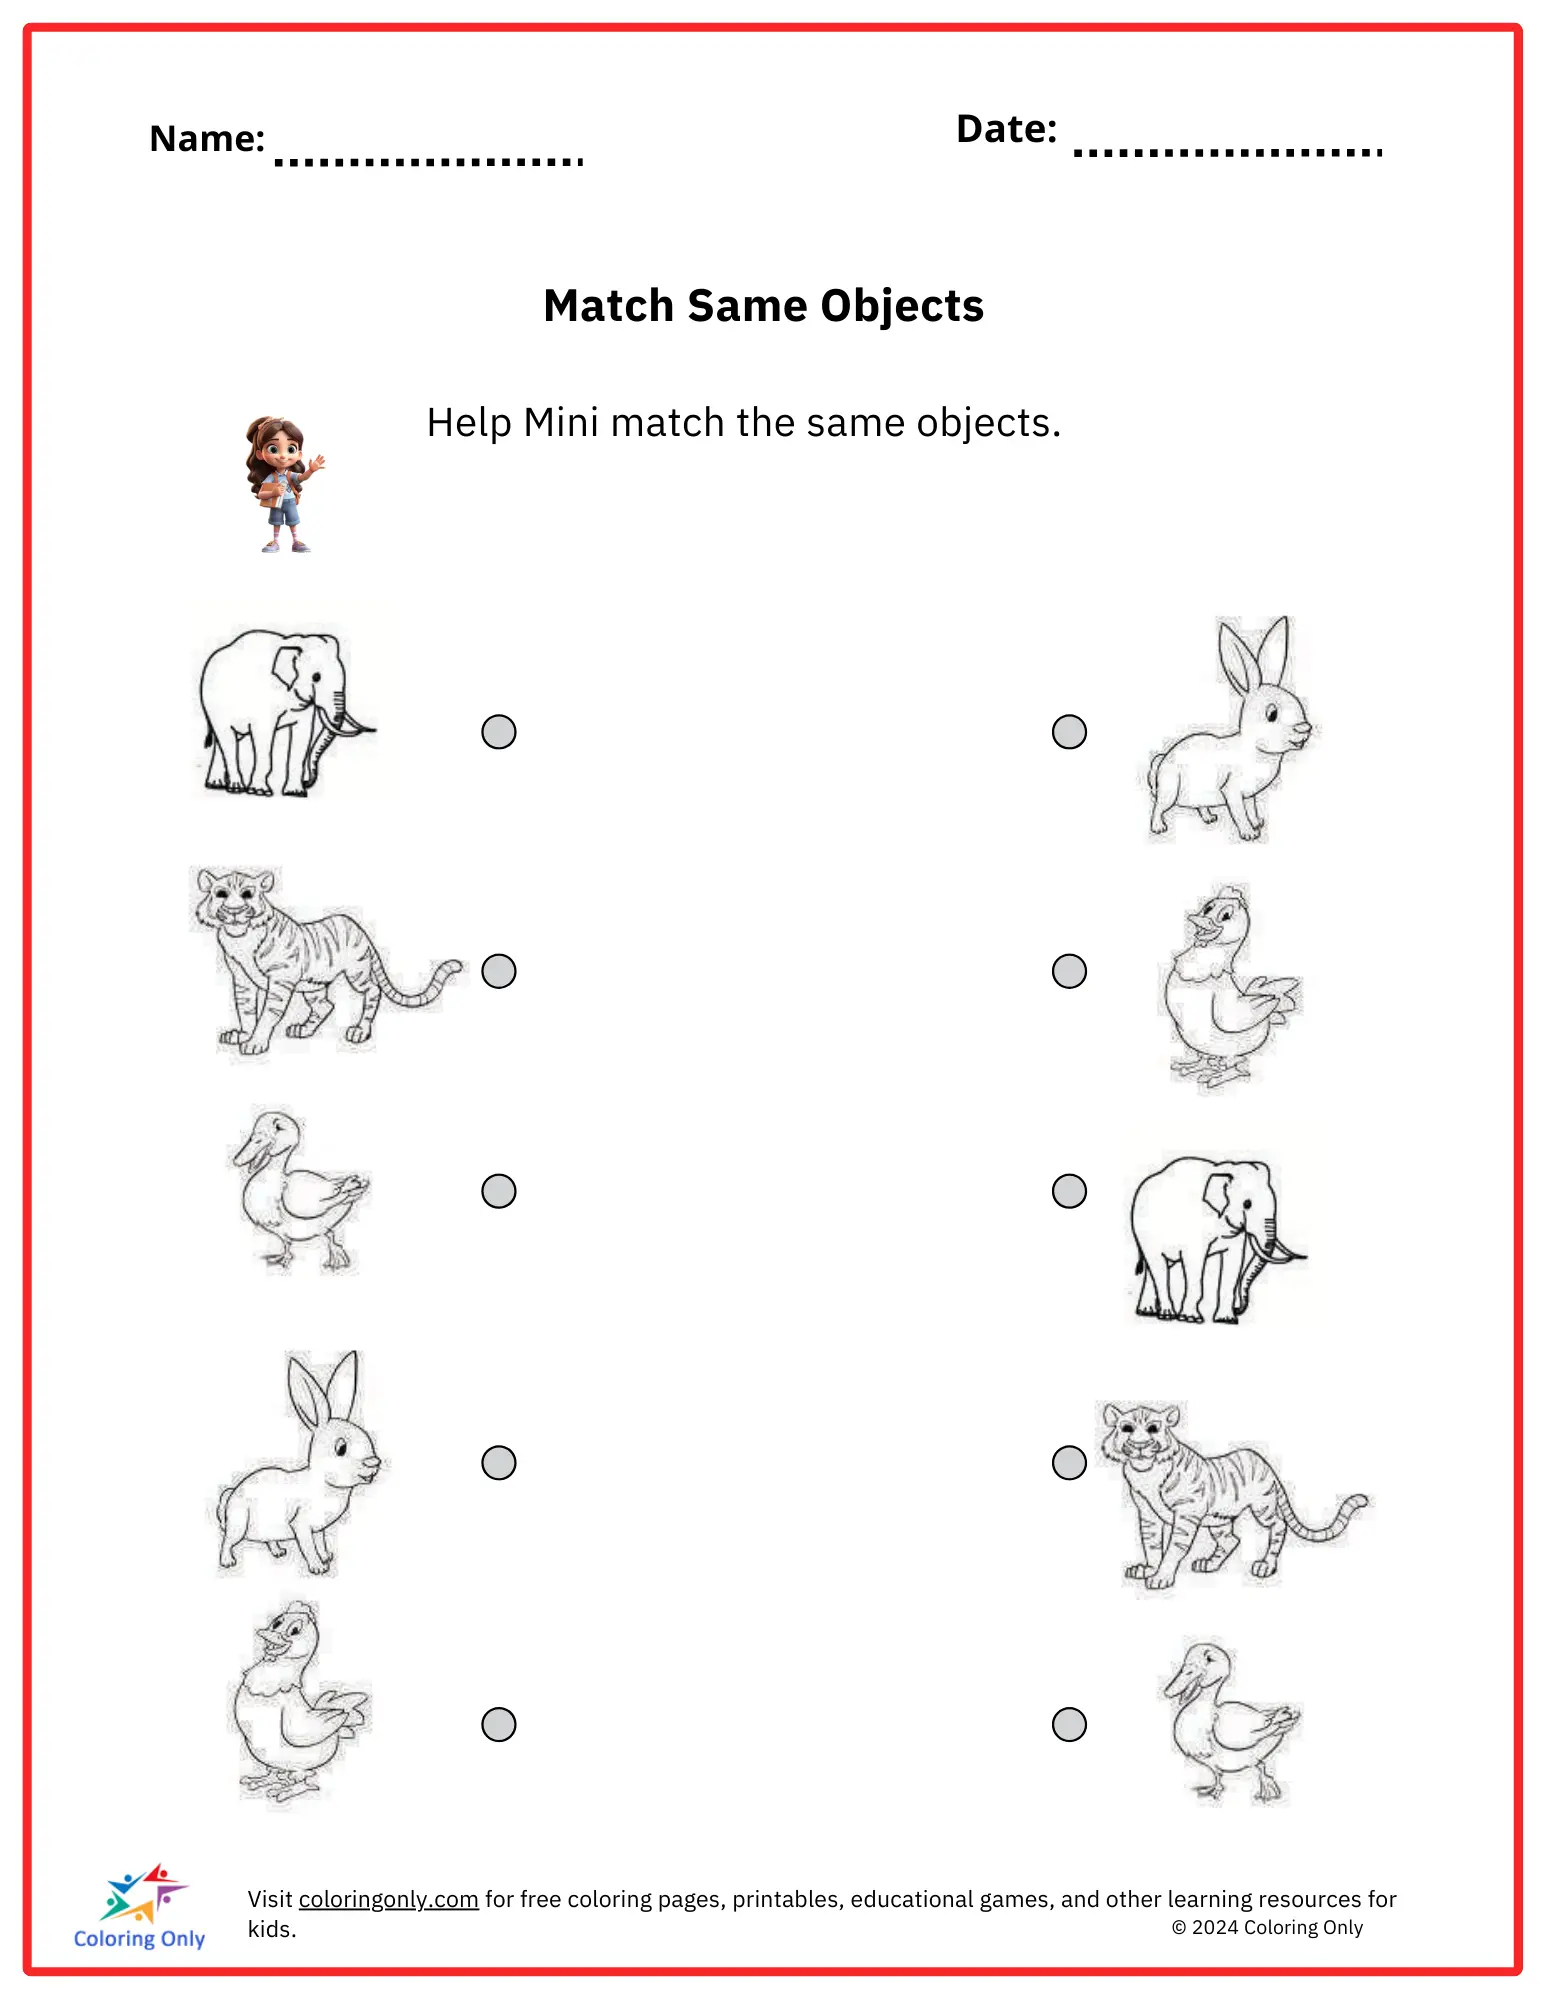 Match Same Objects Free Printable Worksheet